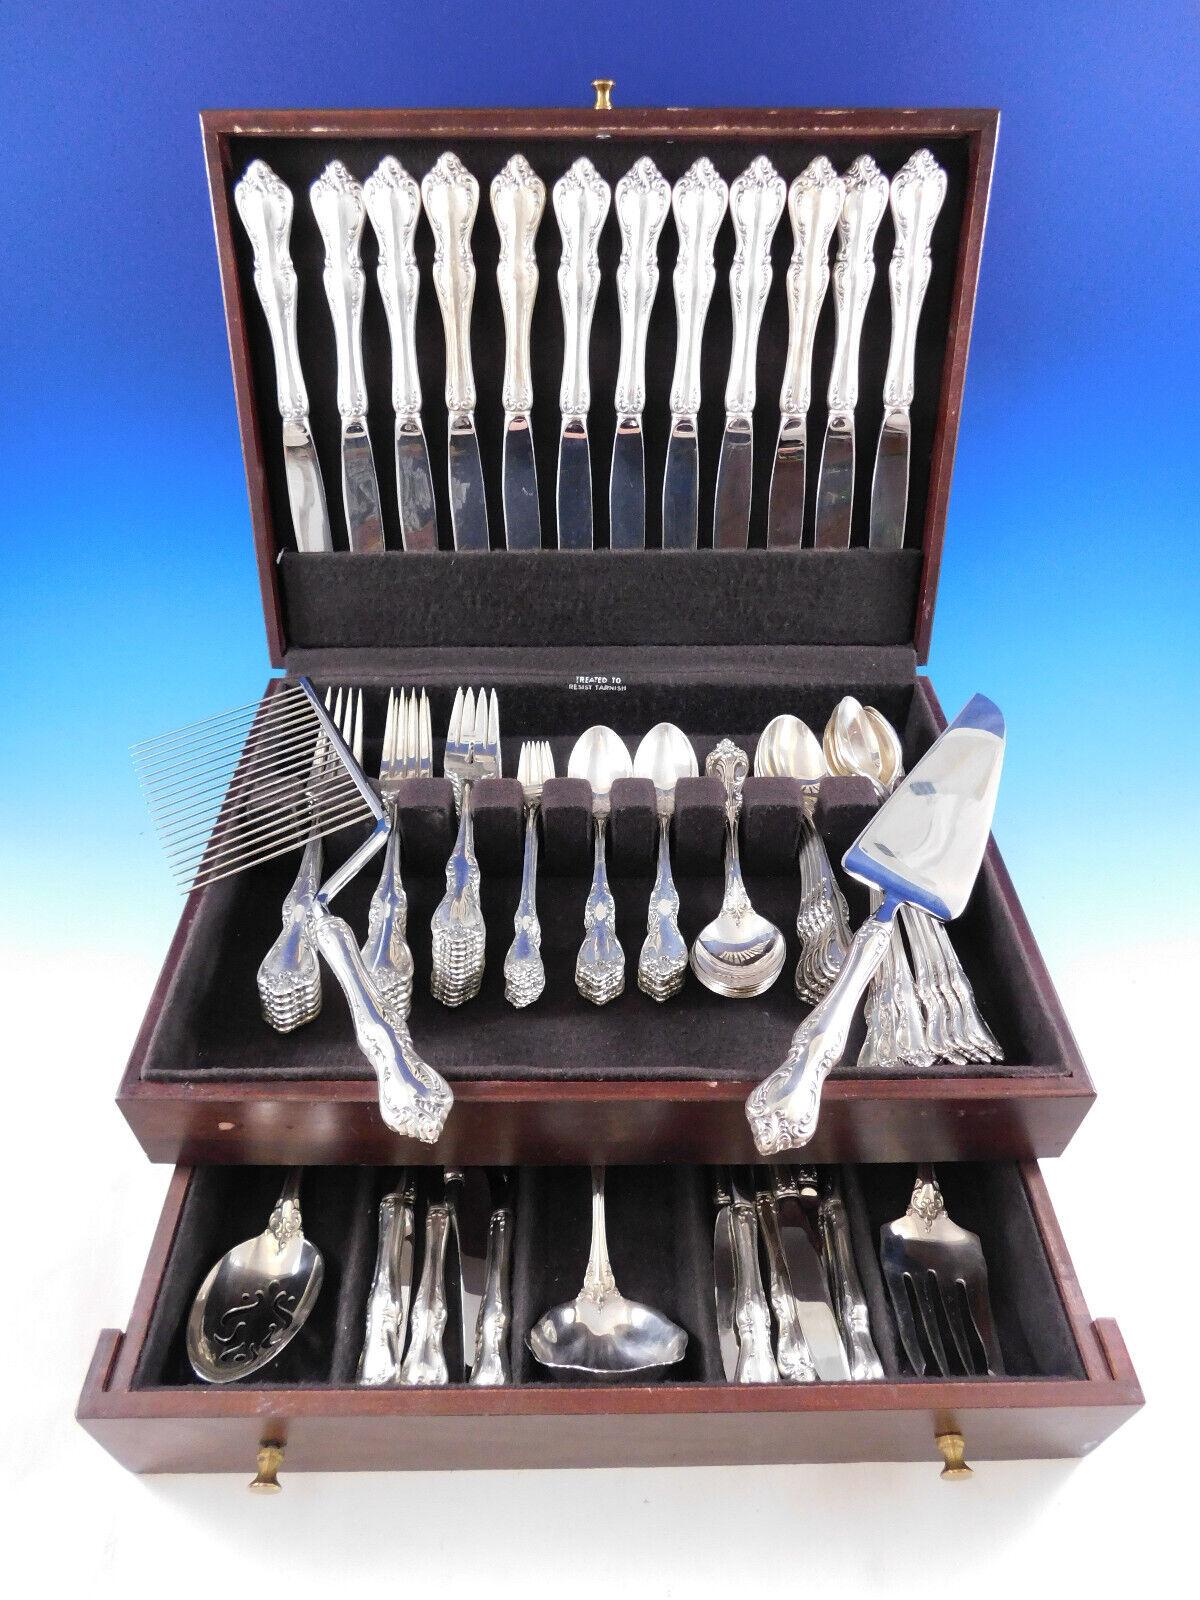 Debussy made by Towle is a very graceful sterling flatware pattern inspired by the famous French composer, Achille-Claude Debussy, for whom it was named after.
Gorgeous Dinner Size Debussy by Towle sterling silver Flatware set, 101 pieces. This set